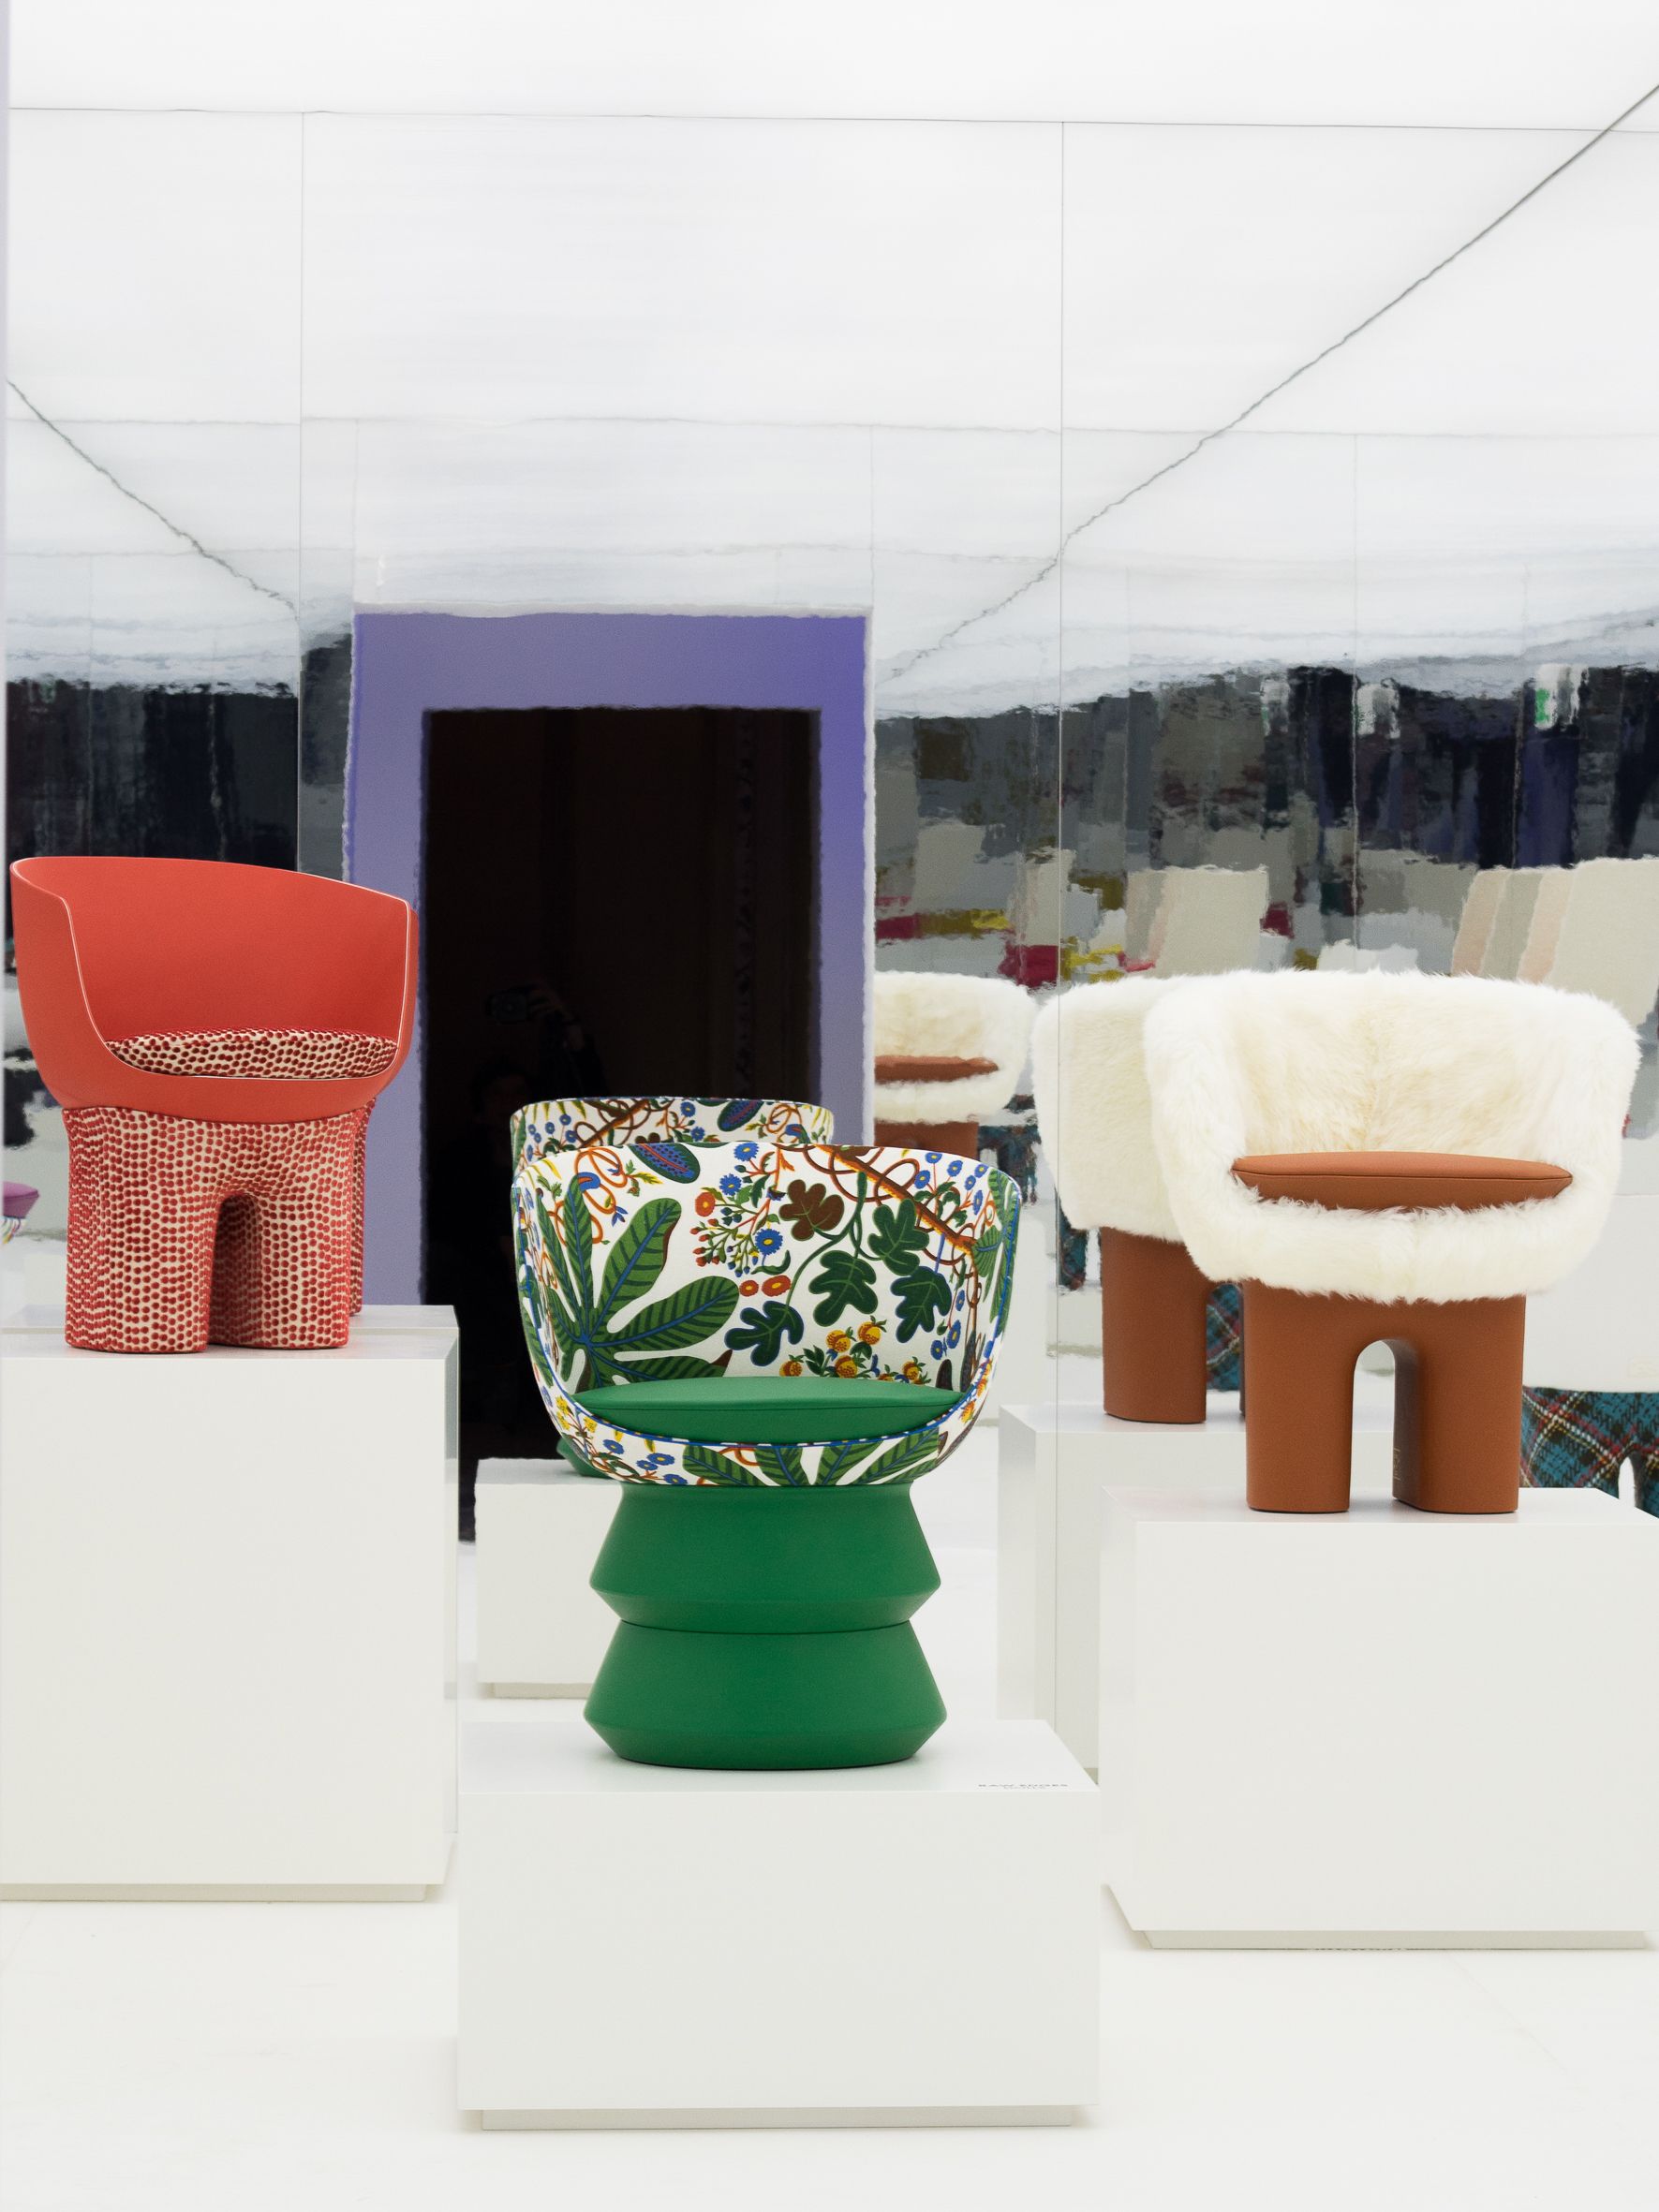 Louis Vuitton unveils Objets Nomades at Fuorisalone 2019